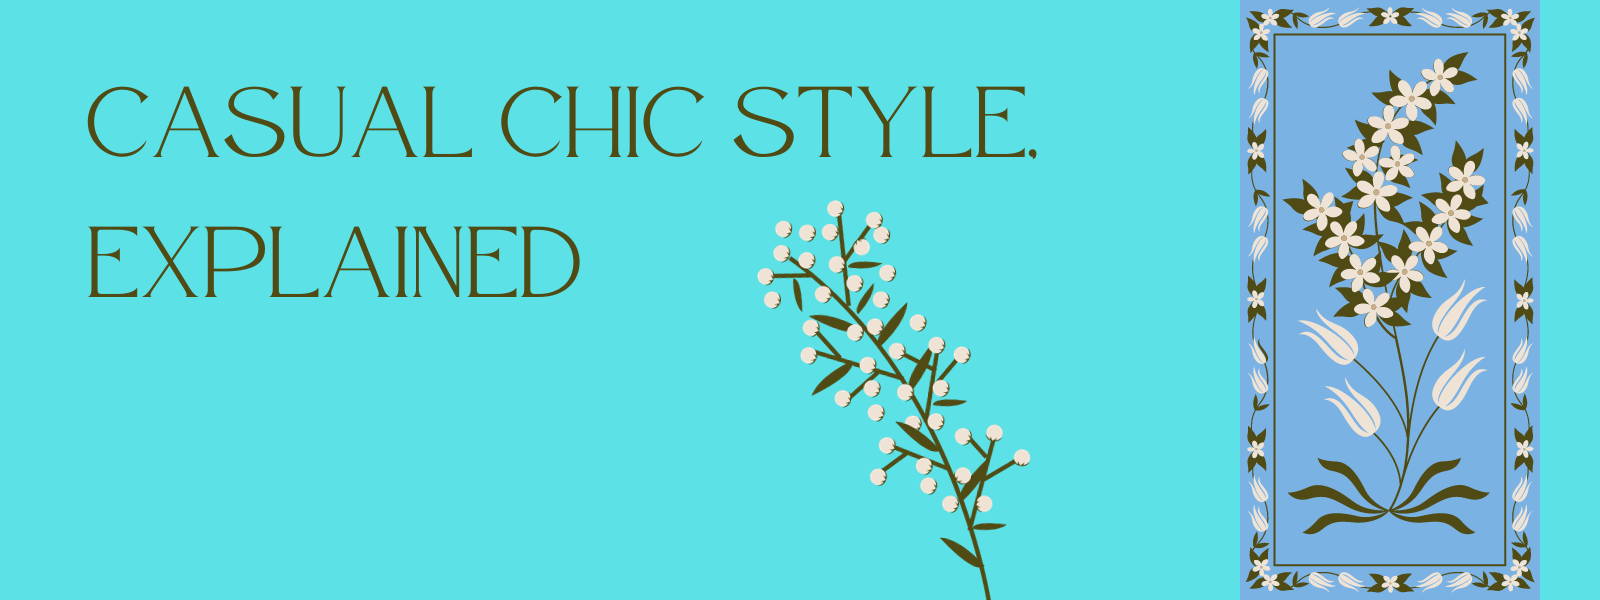 Casual Chic Style, Explained